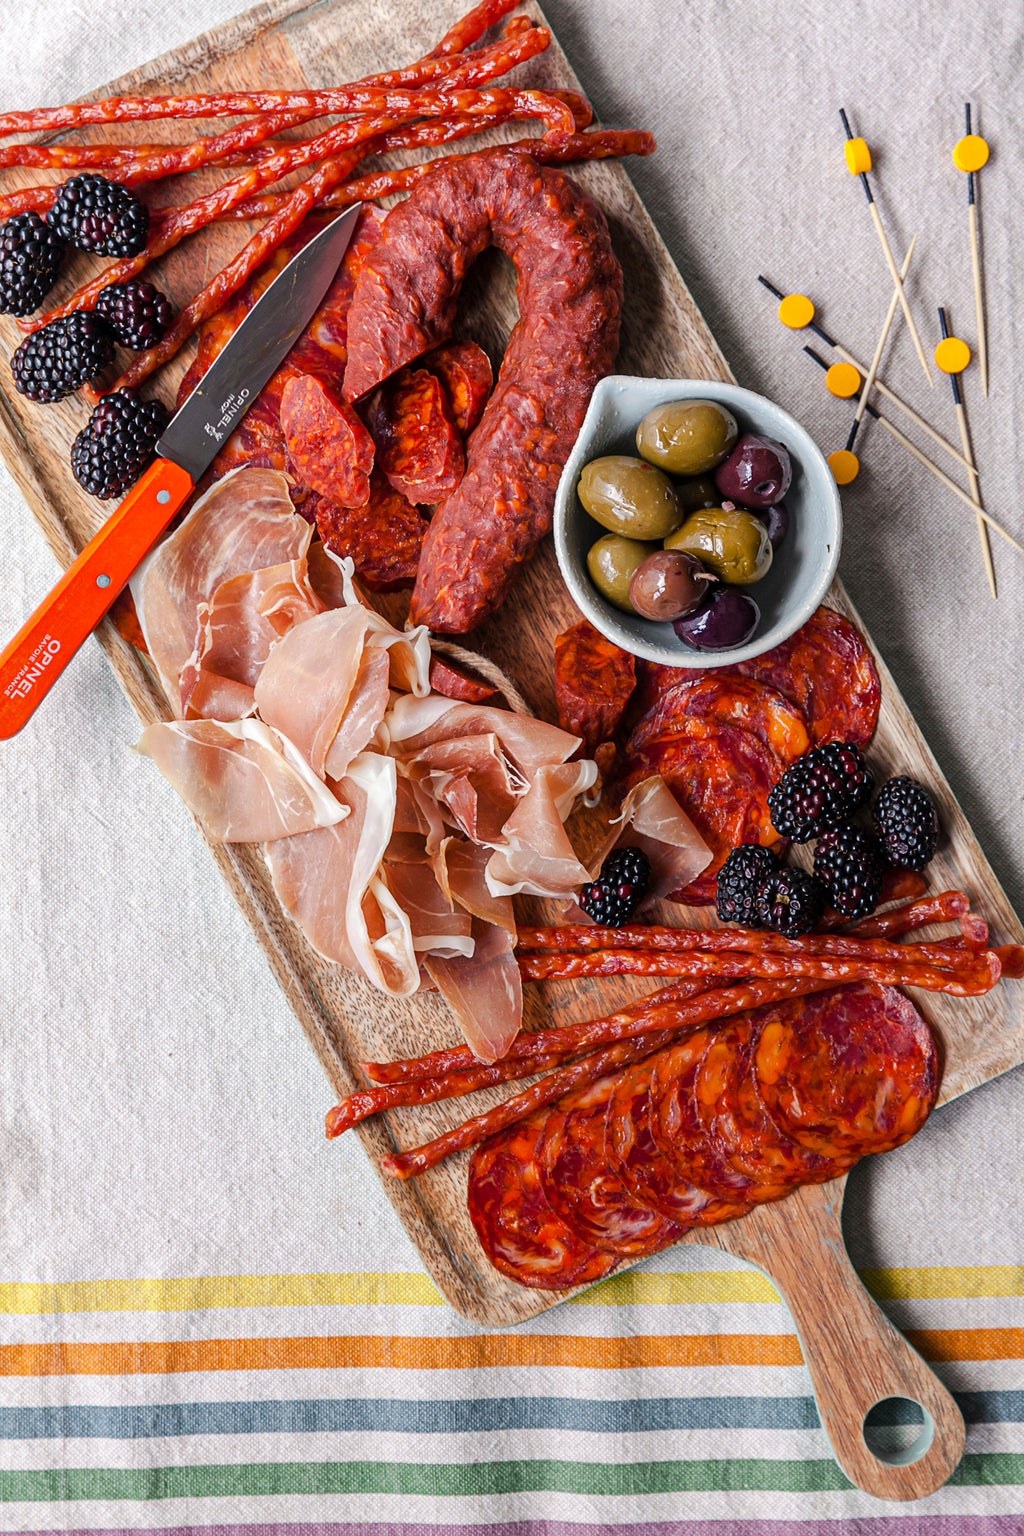 Cured: What you need to know about salumi (including salami)